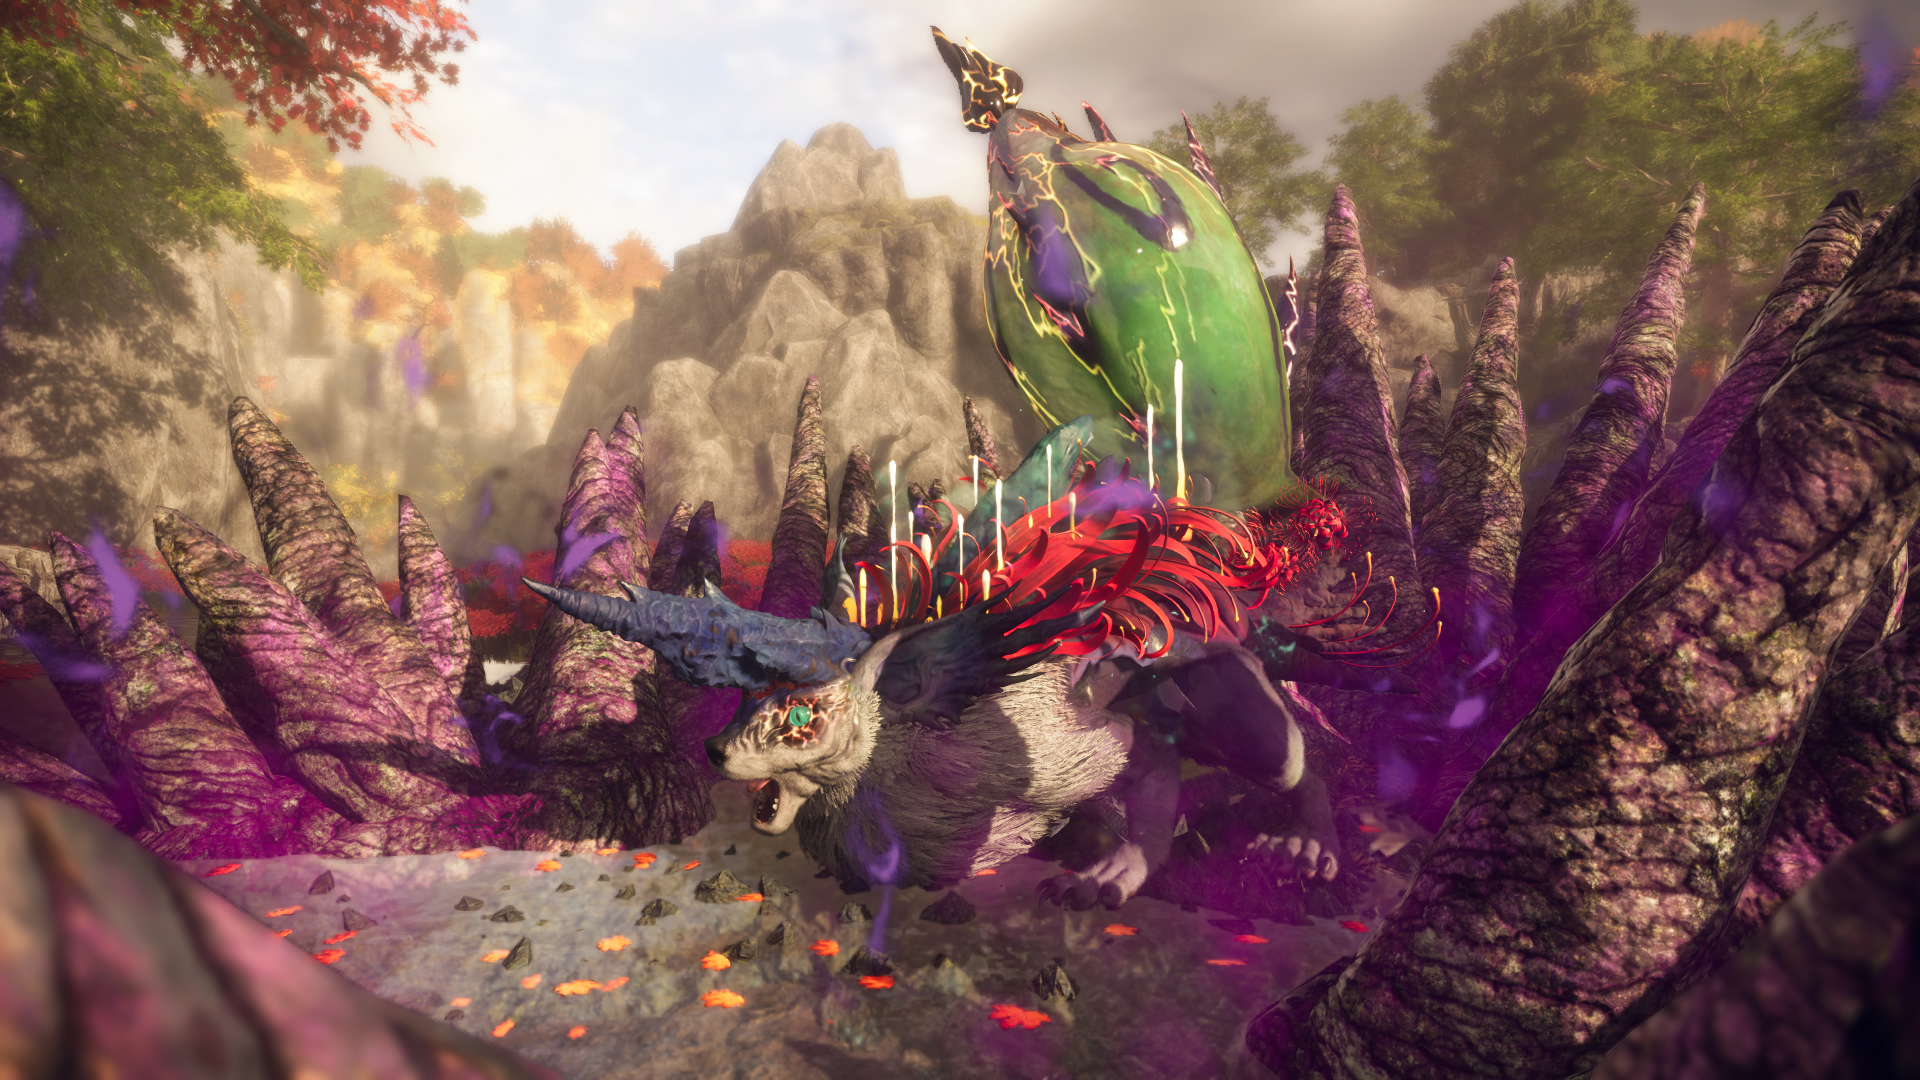 Wild Hearts New Content Update Introduces Deathhaze Gloombeak, Serial Hunts  Quests And More